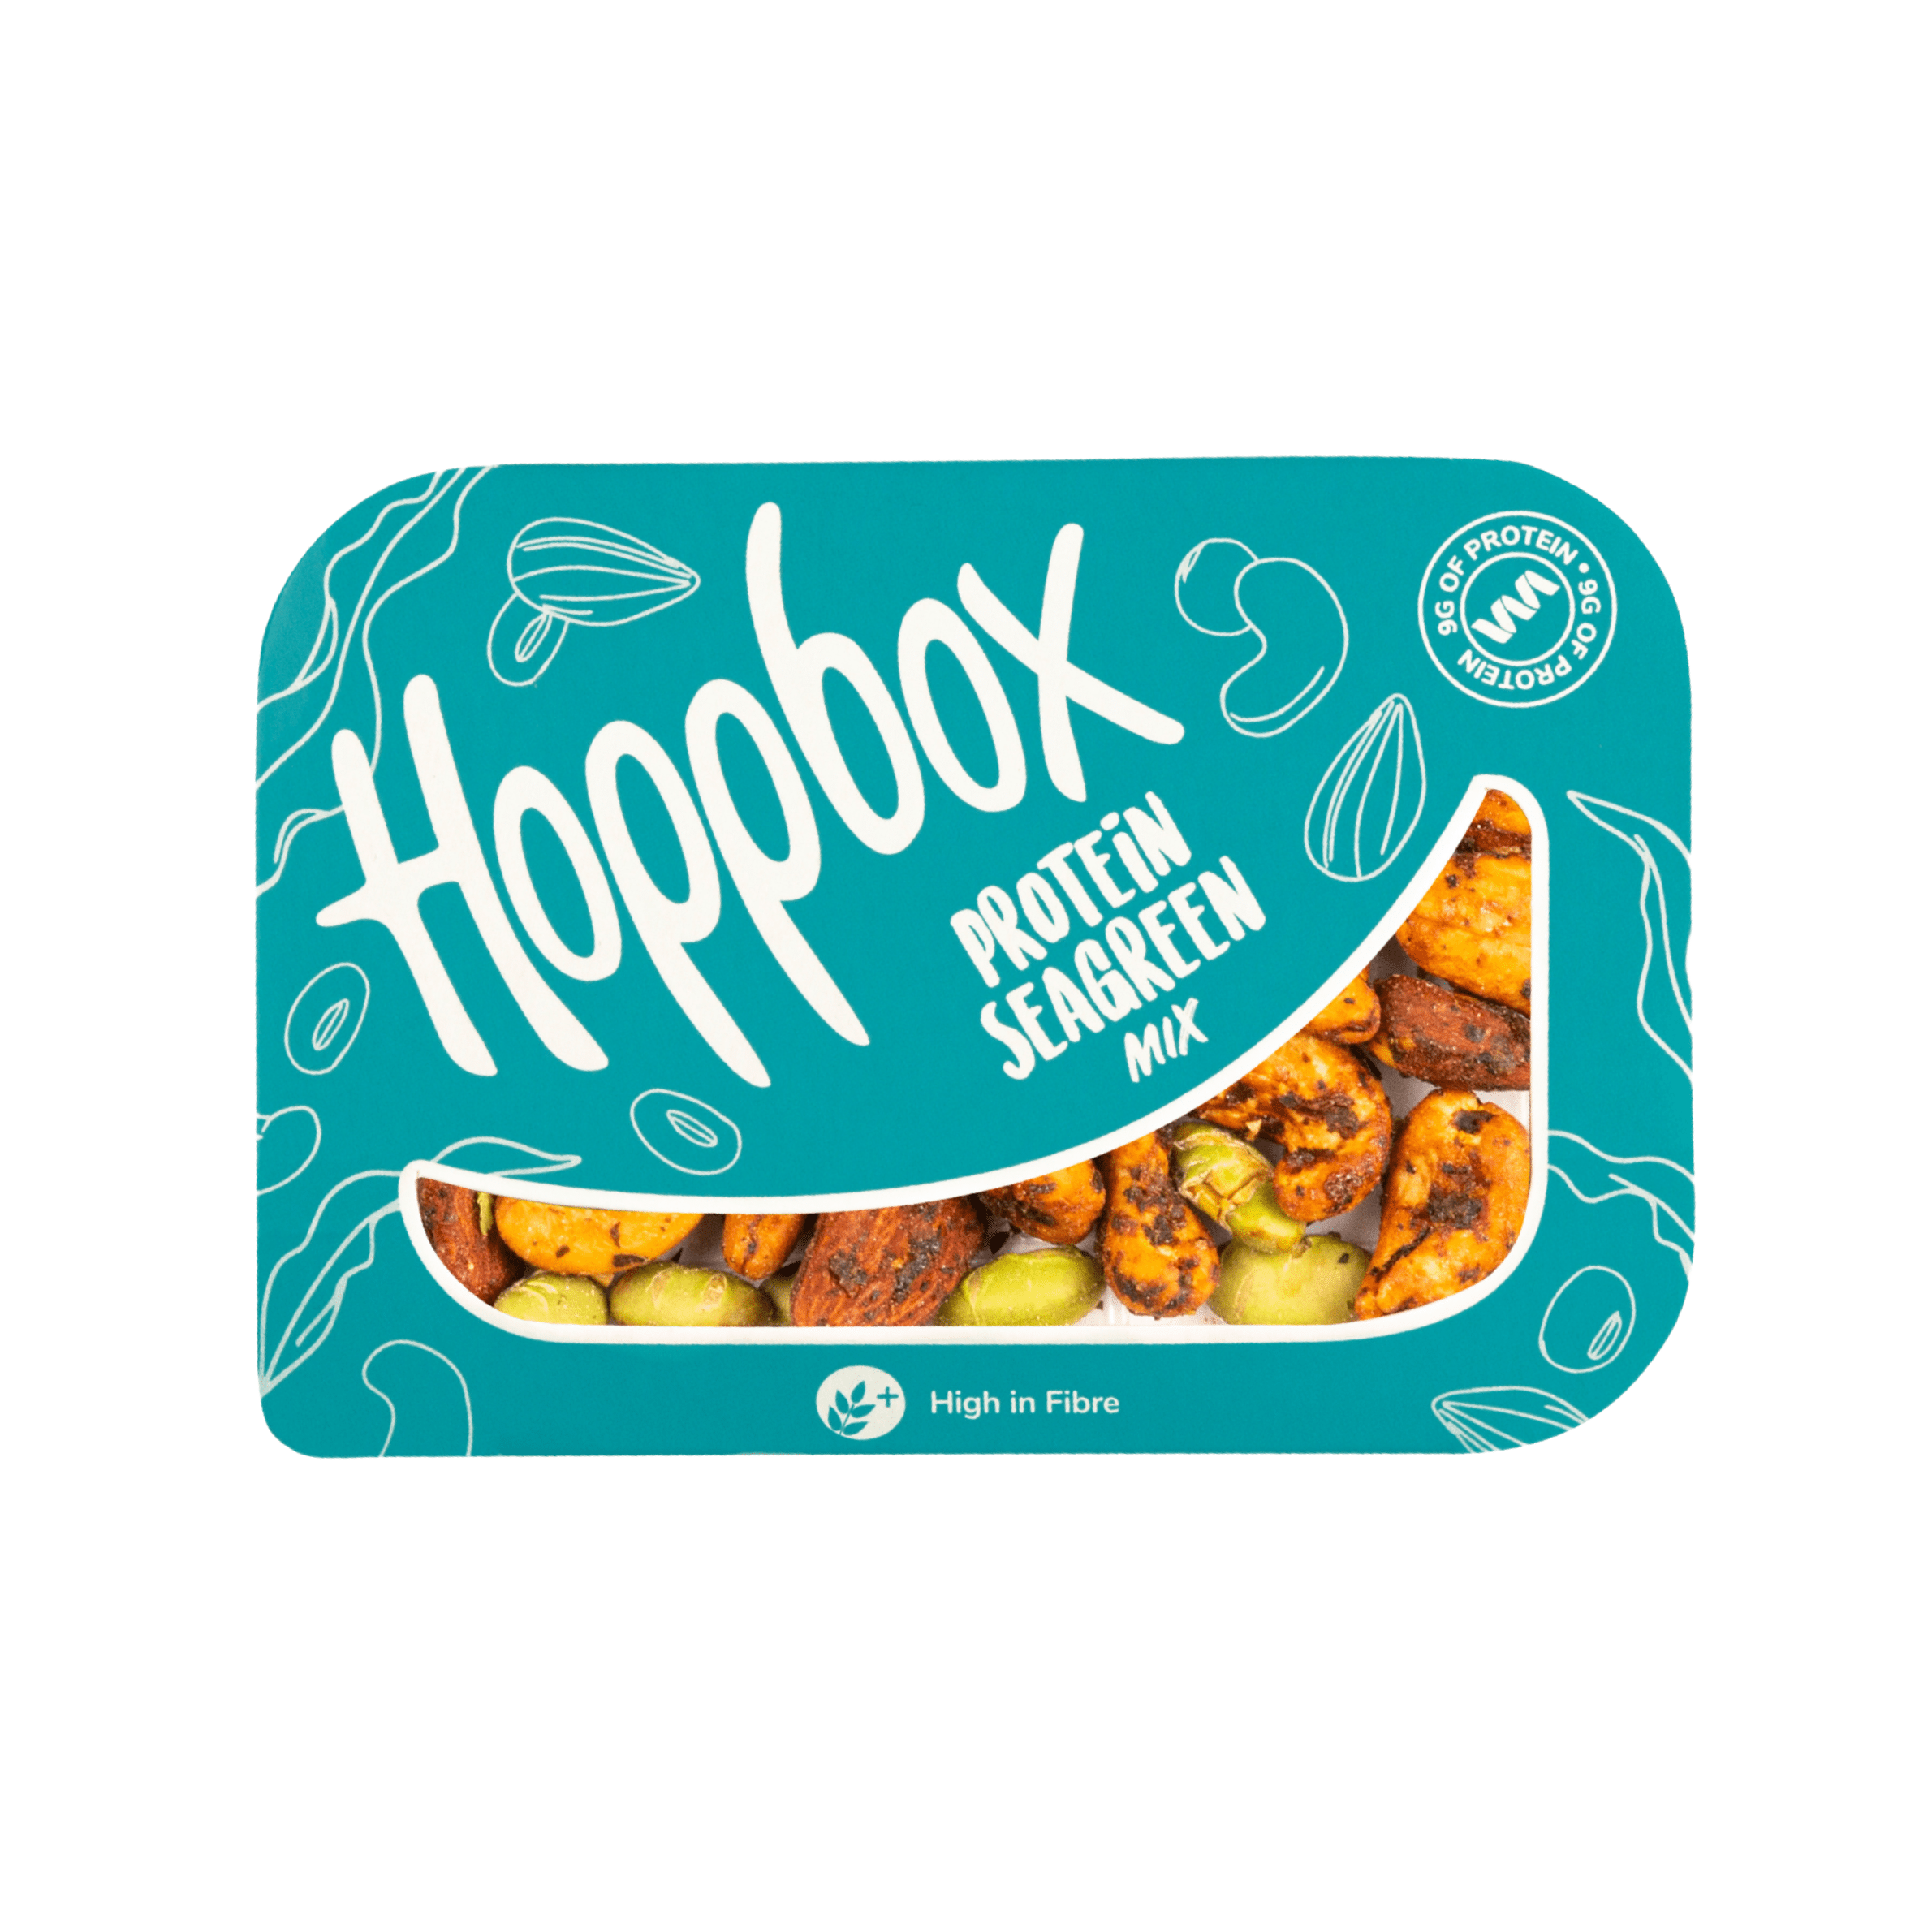 hoppbox, suisse, seagreen protein, algues